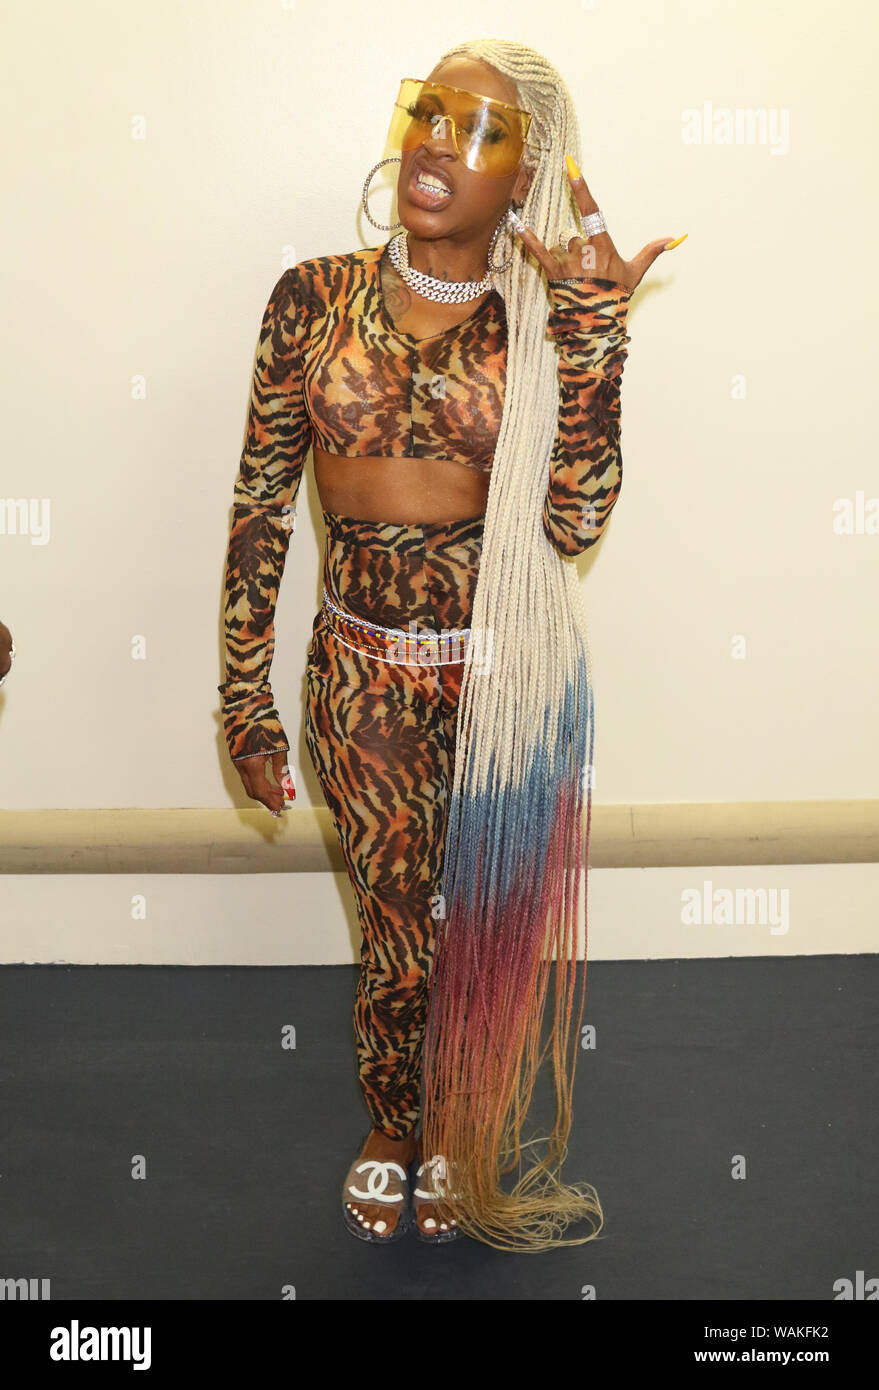 New York, NY, USA. 20th Aug, 2019. LiL Mo backstage at the Power Season 6 Premiere August 20, 2019 at Madison Square Garden in New York City. Photo Credit: Walik Goshorn/Mediapunch/Alamy Live News Stock Photo